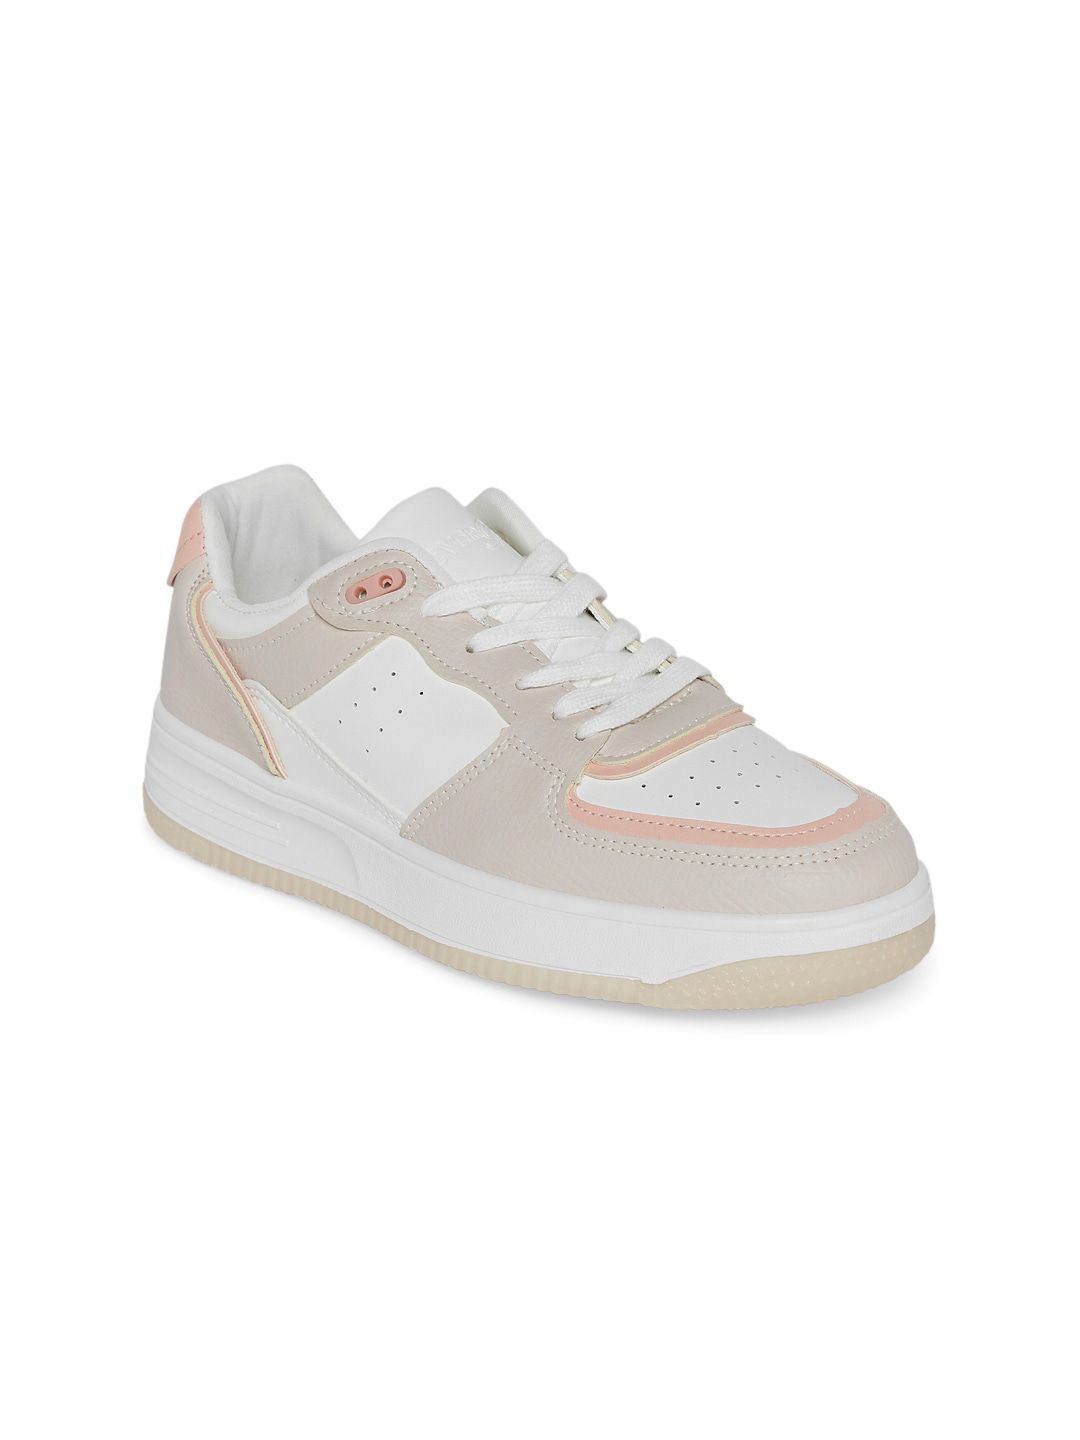 Forever Glam by Pantaloons Women Beige Colourblocked PU Sneakers Price in India